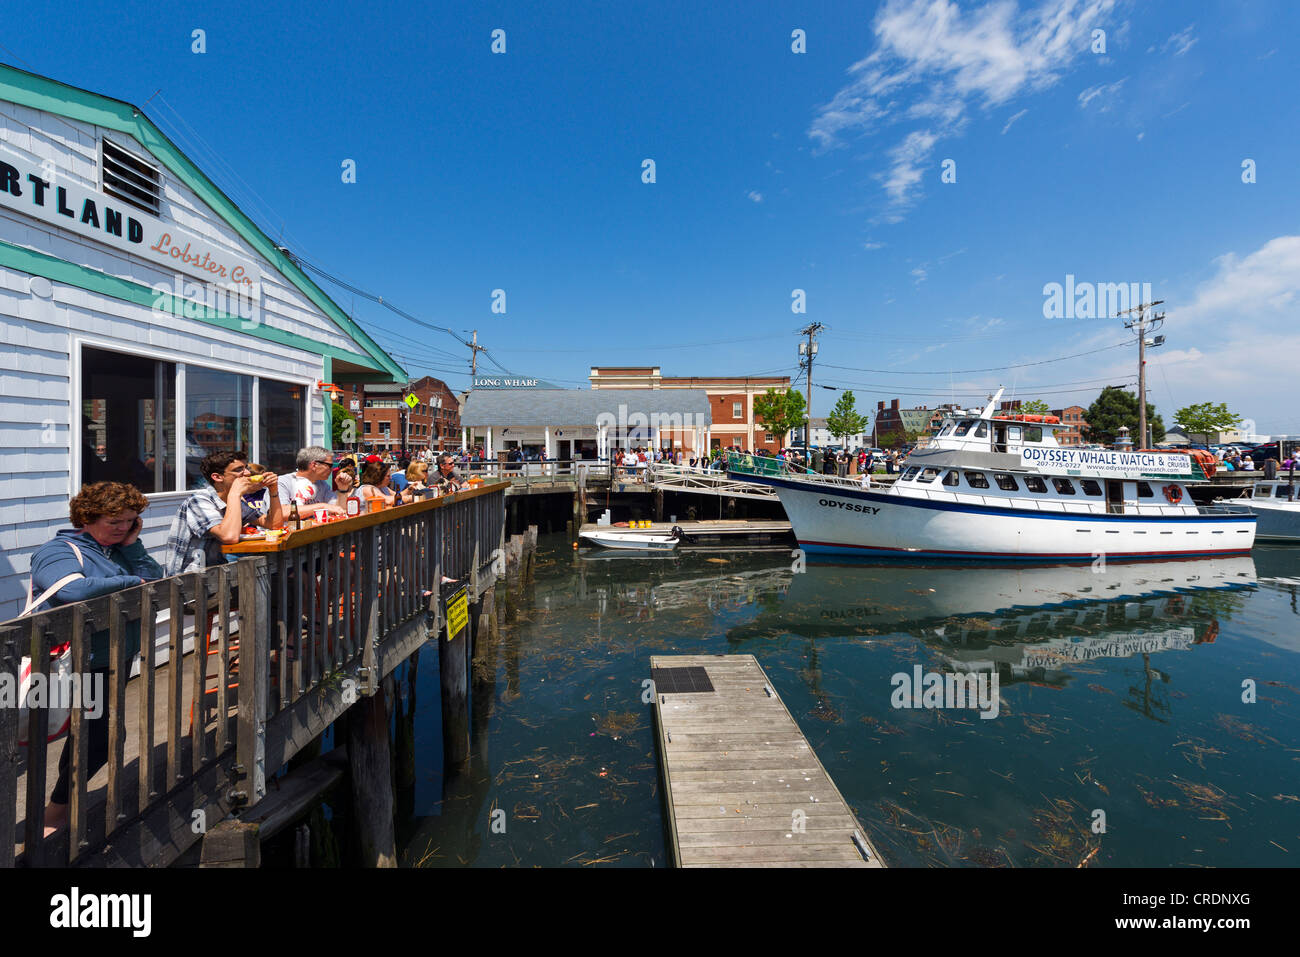 Waterfront lobster restaurant on Long Wharf, Portland, Maine, USA Stock Photo